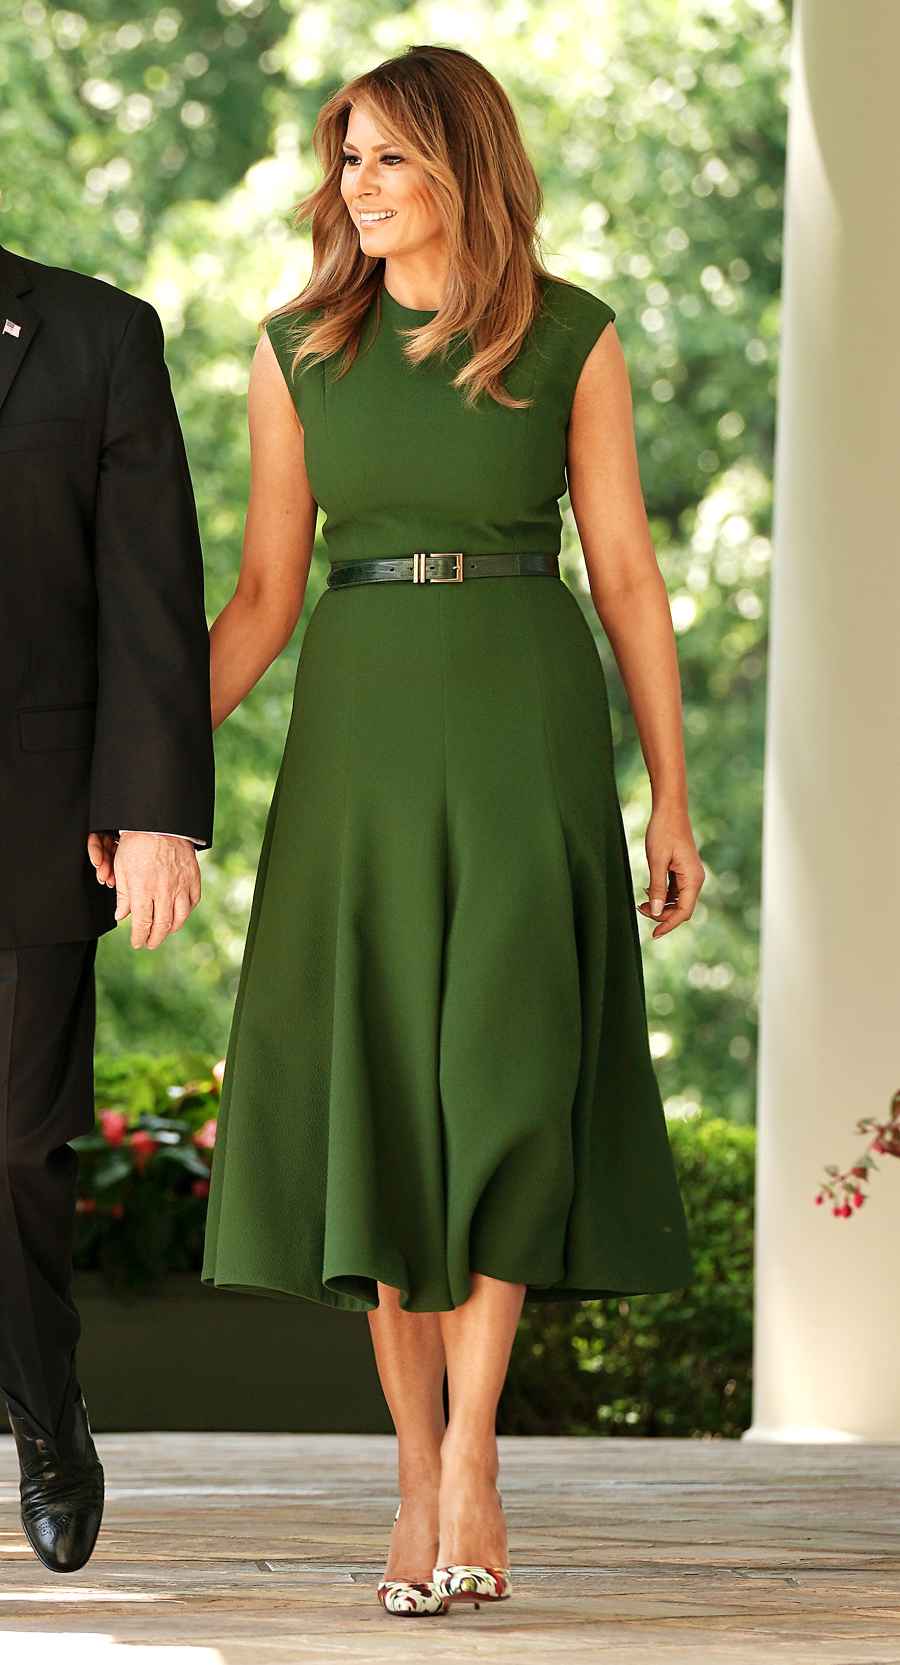 Melania Trump Makes the Case for a Classic Silhouette in a $2,000 Dress